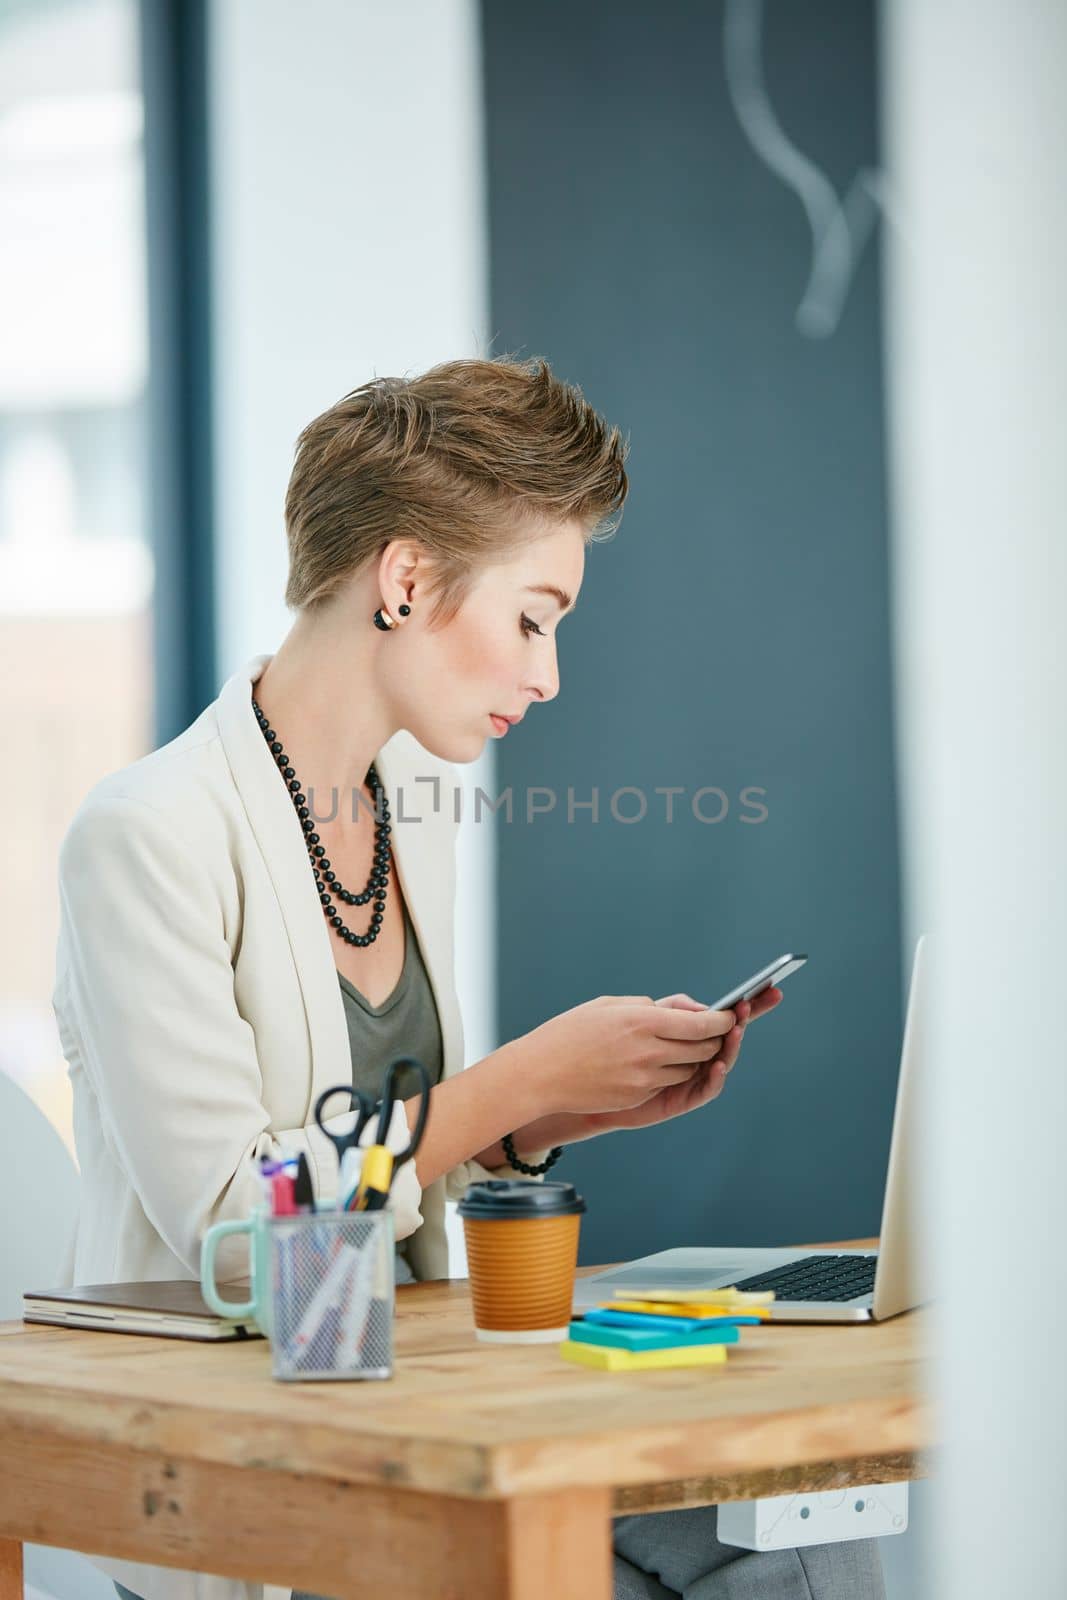 Technology has always been her best business tool. a young businesswoman texting on a cellphone in an office